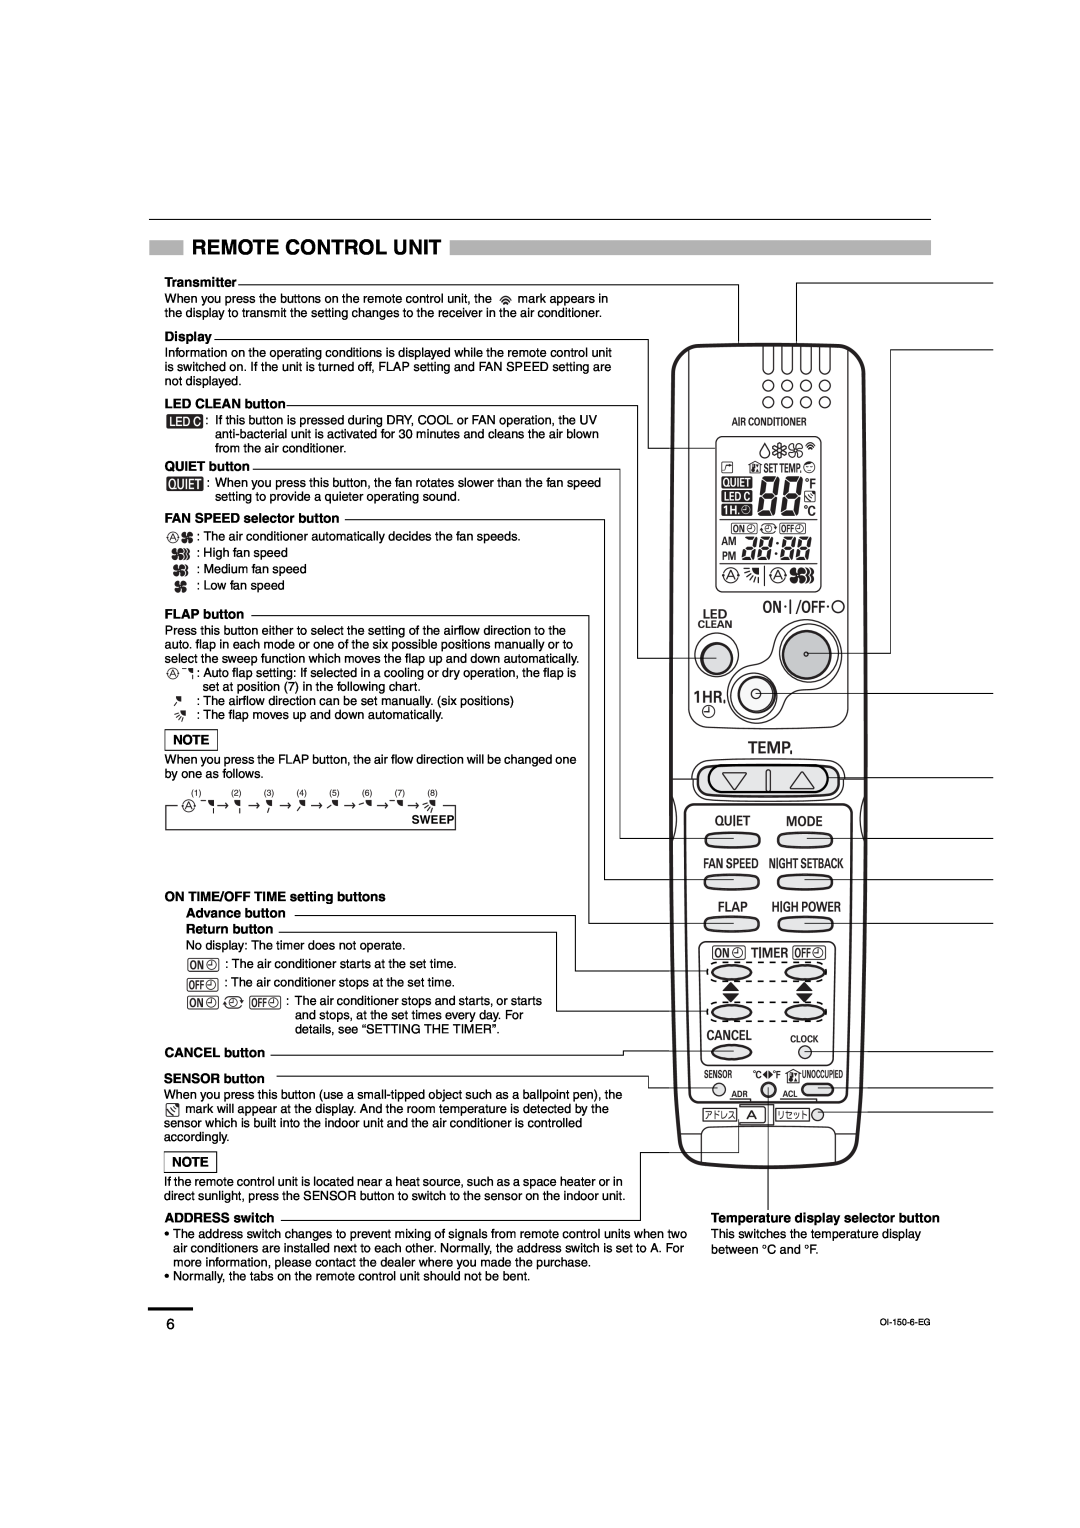 Sanyo C3082, C3682 Remote Control Unit, Transmitter, Display, LED CLEAN button, QUIET button, FAN SPEED selector button 